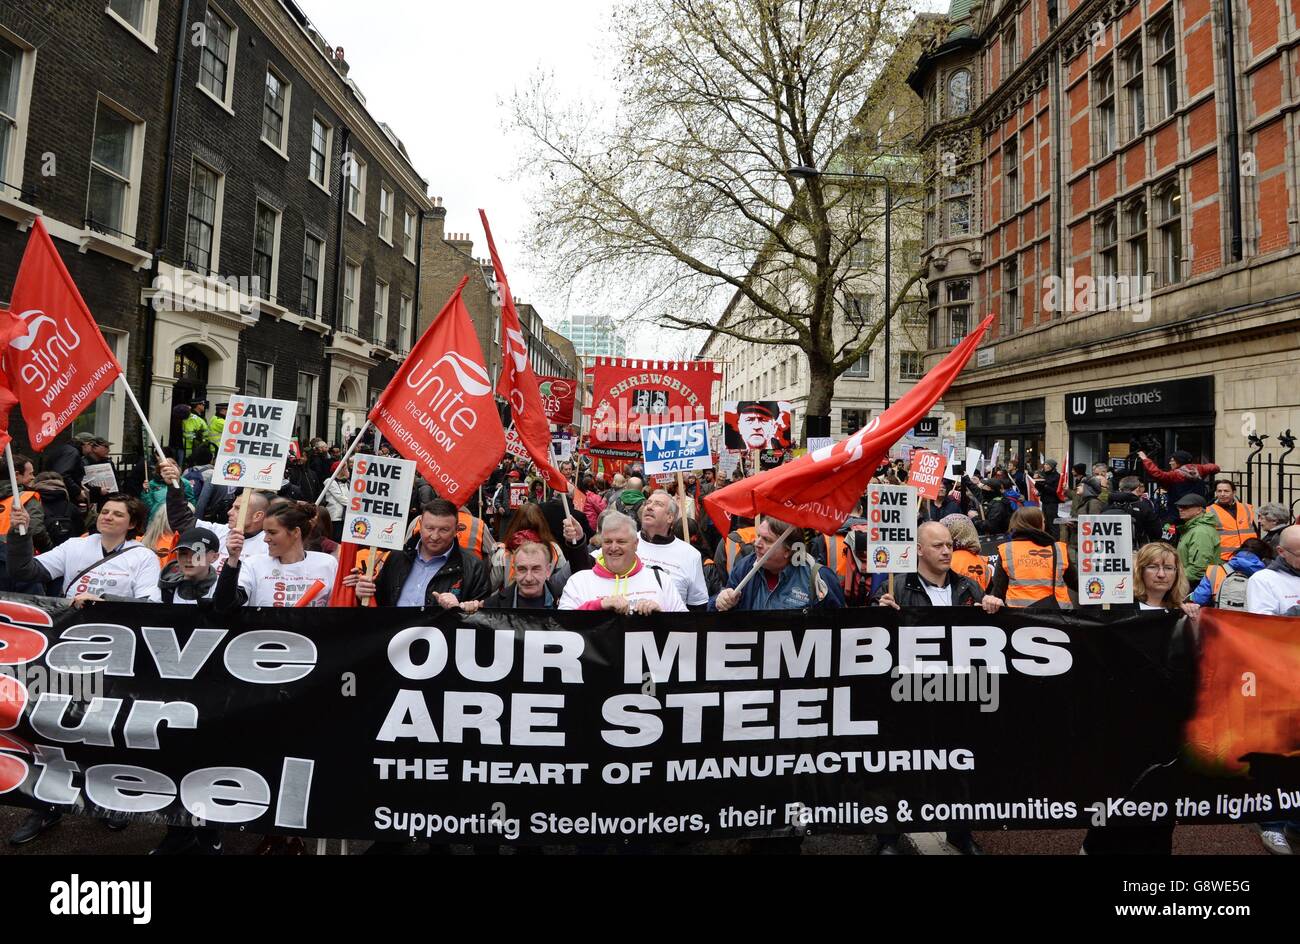 Campaigners marching in an anti-austerity demonstration in central London. Stock Photo